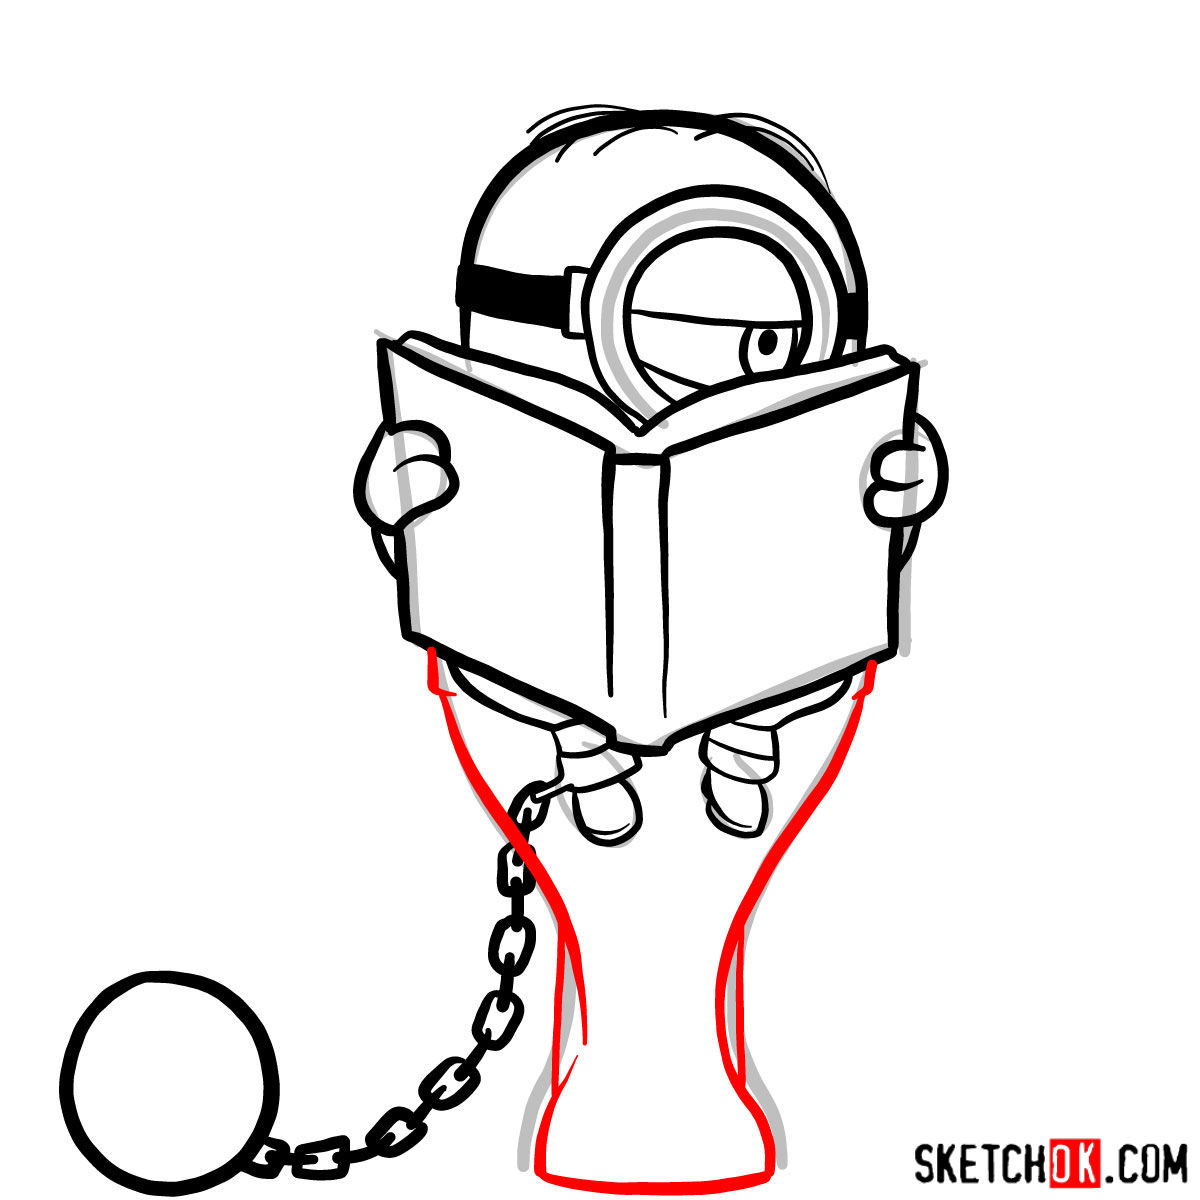 How to draw minion in the toilet reading a book - step 08